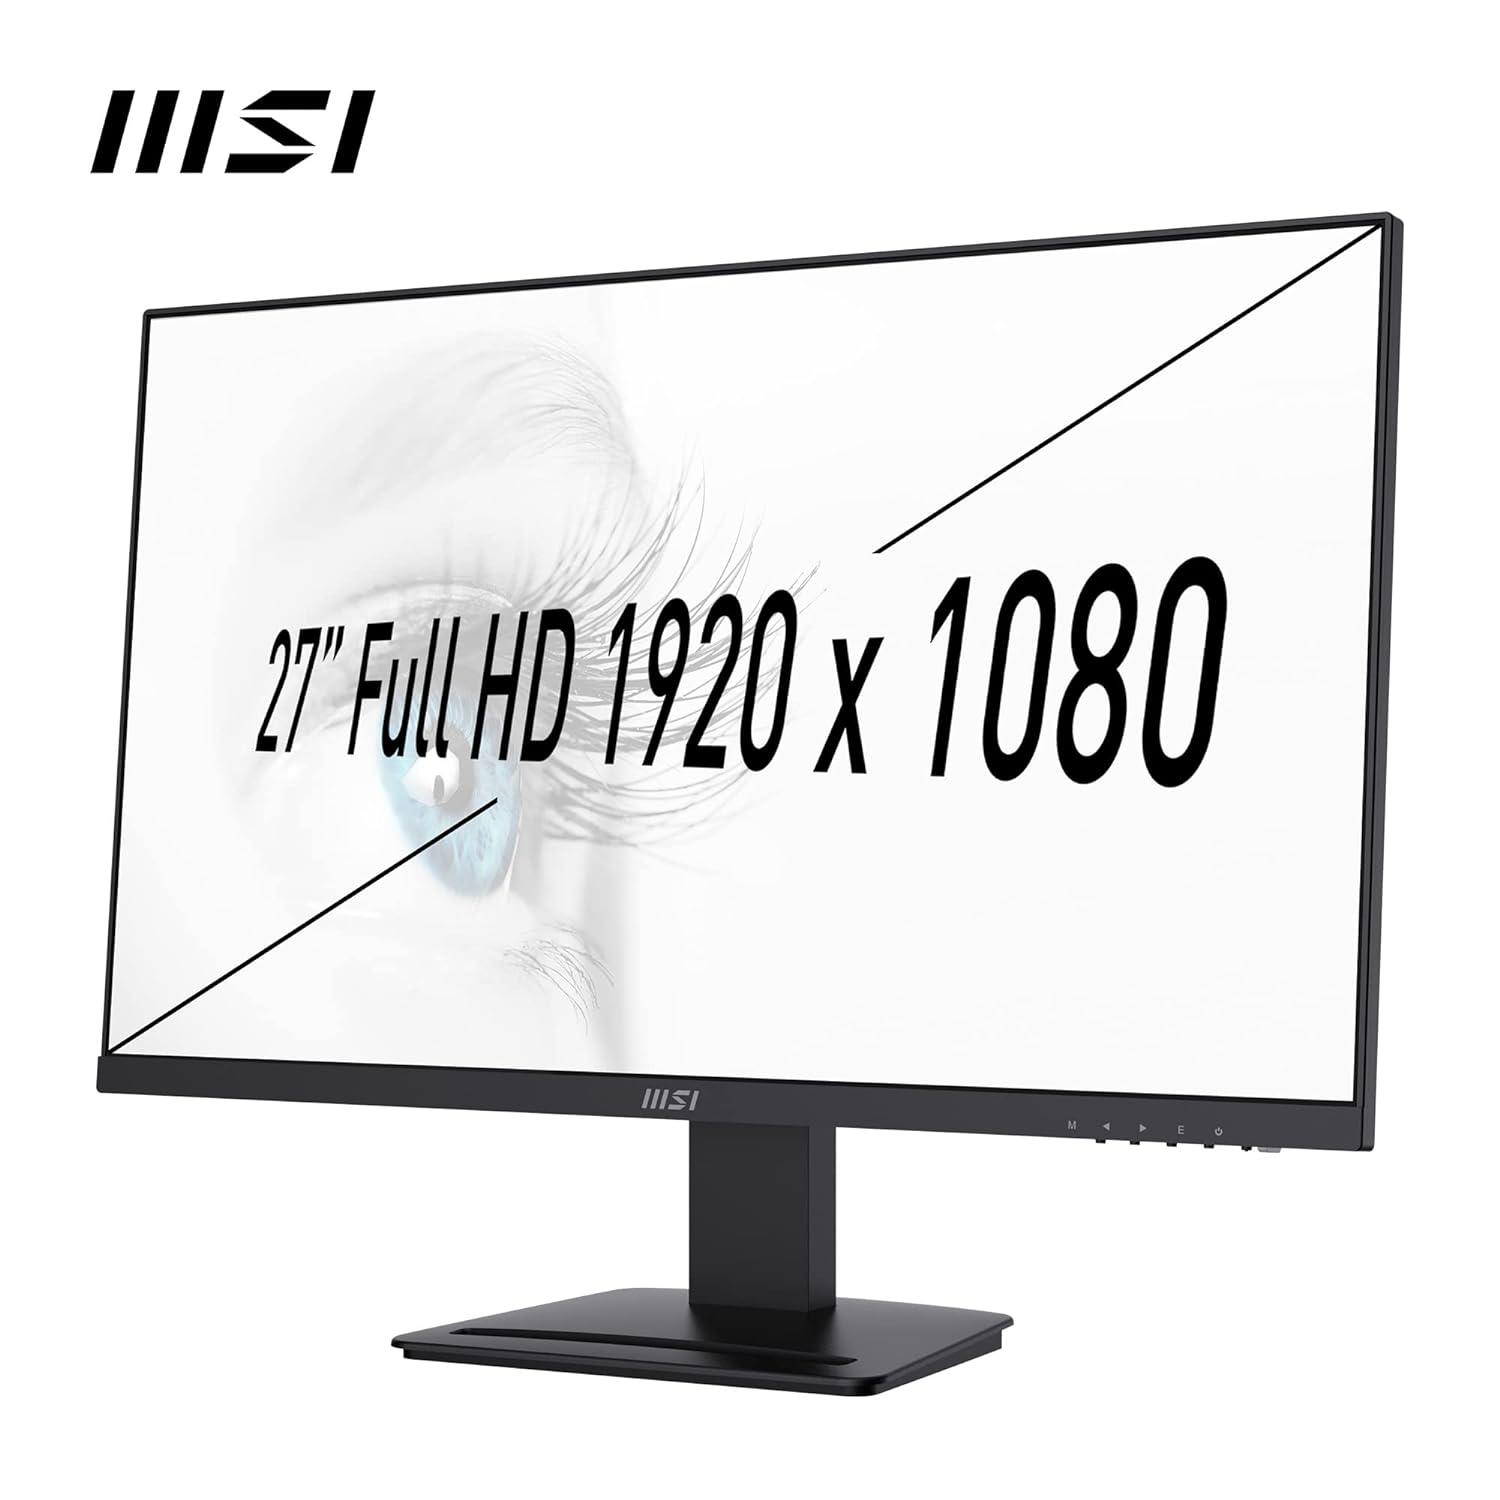 MSI PRO MP273 Business & Productivity Monitor 27 Inch Fullhd (1920 X 1080) 75Hz Refresh Rate, IPS Panel With Eye-Friendly Technology, VESA-Mount Supported, Black